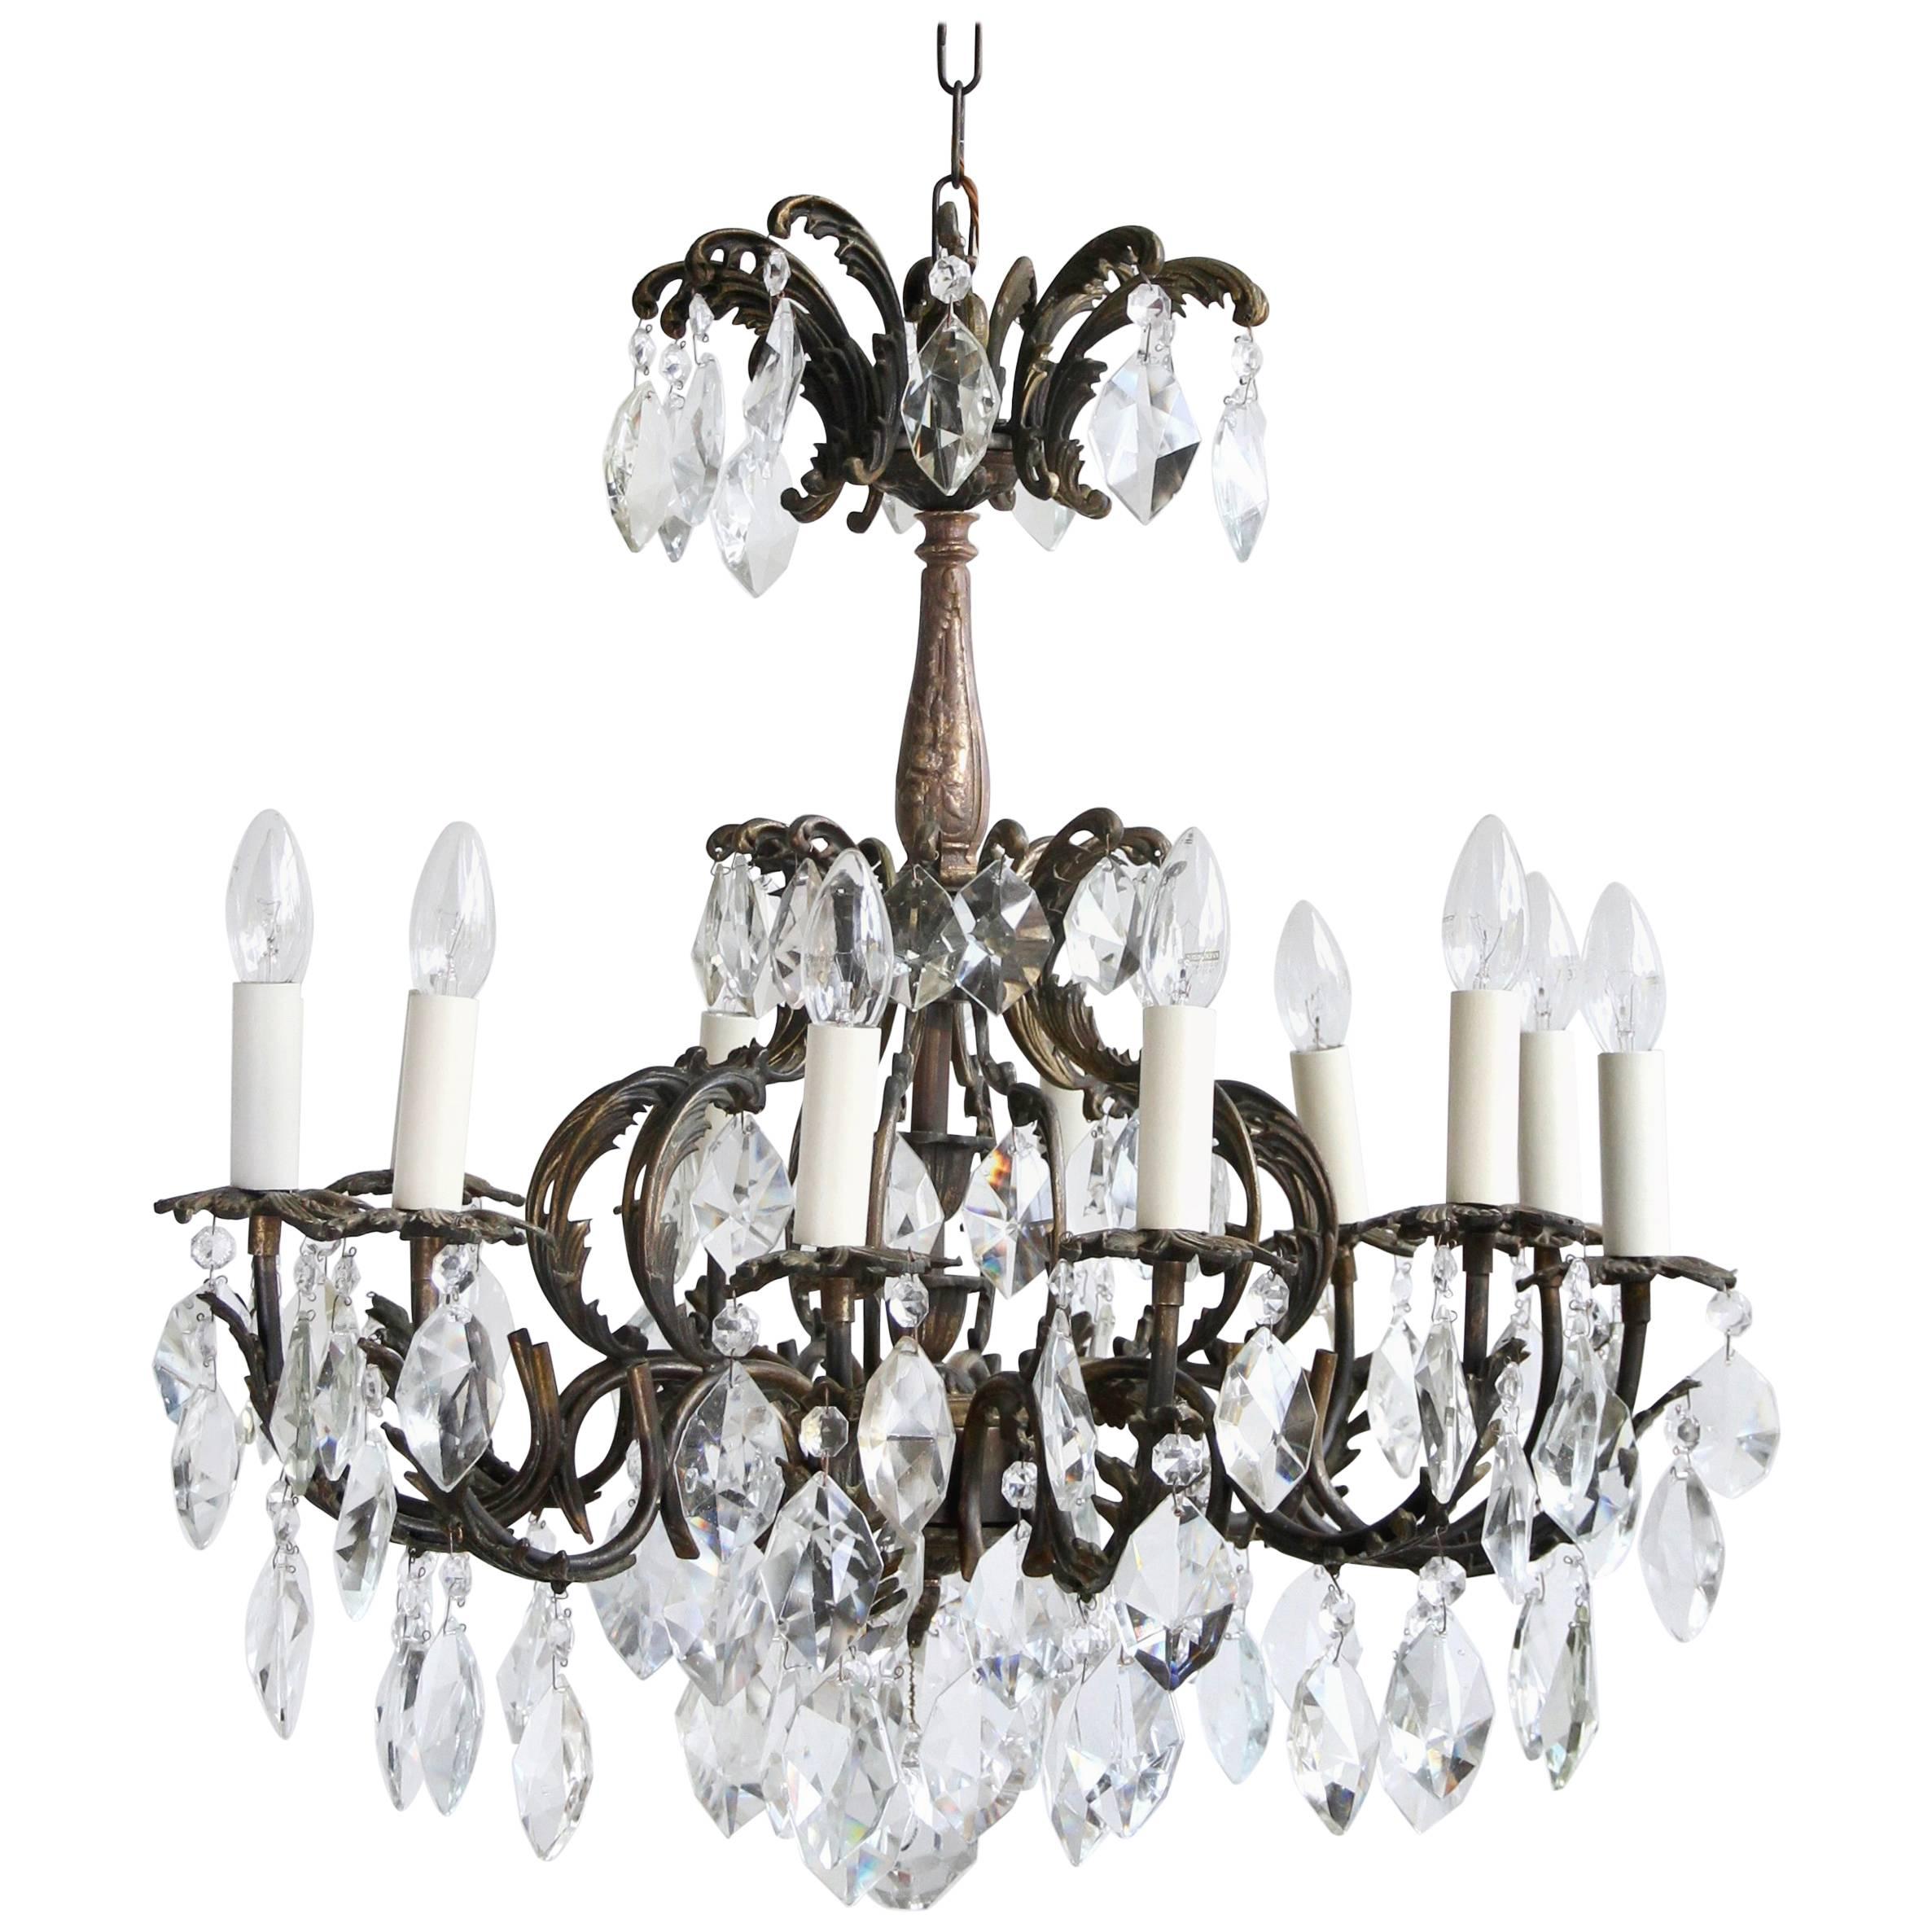 Early 1900s French Ornate Brass Chandelier with Cut-Crystal Iceberg Drops